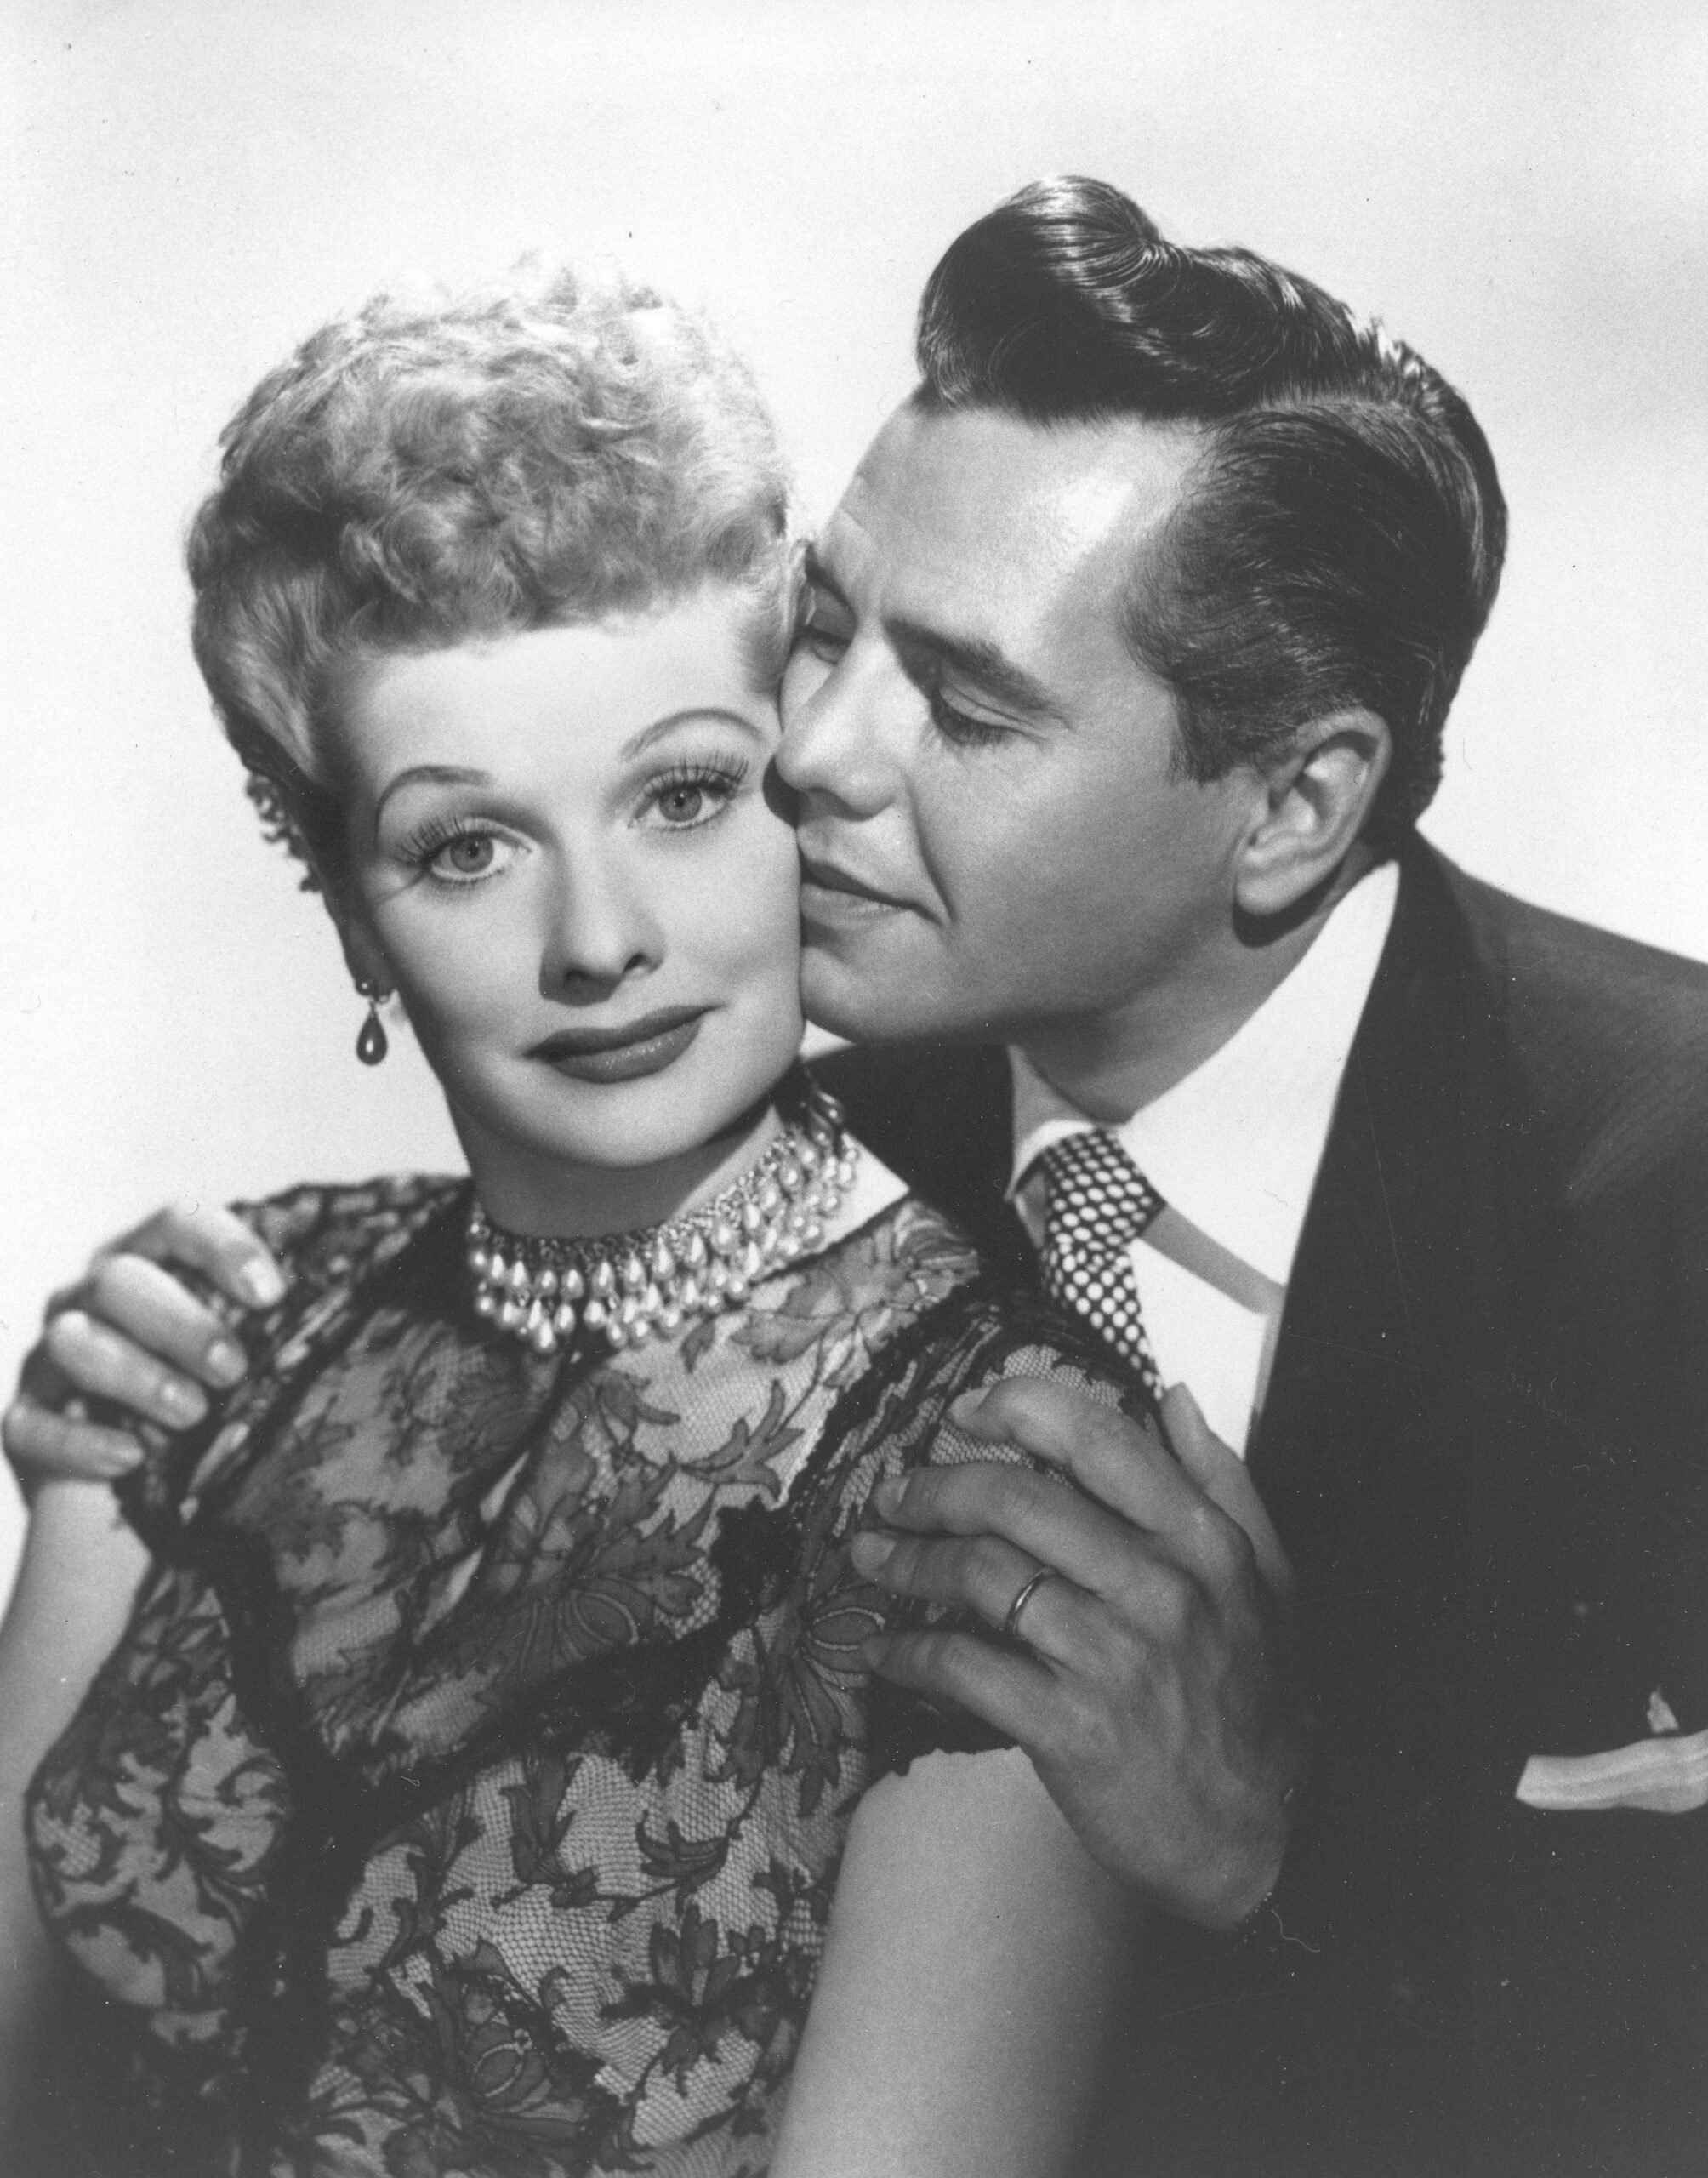 The fifth episode of “Lucy,” the third season of the podcast The Plot Thickens, centered on
Lucille Ball’s life between 1940 and 1950 and her relationship with Desi Arnaz